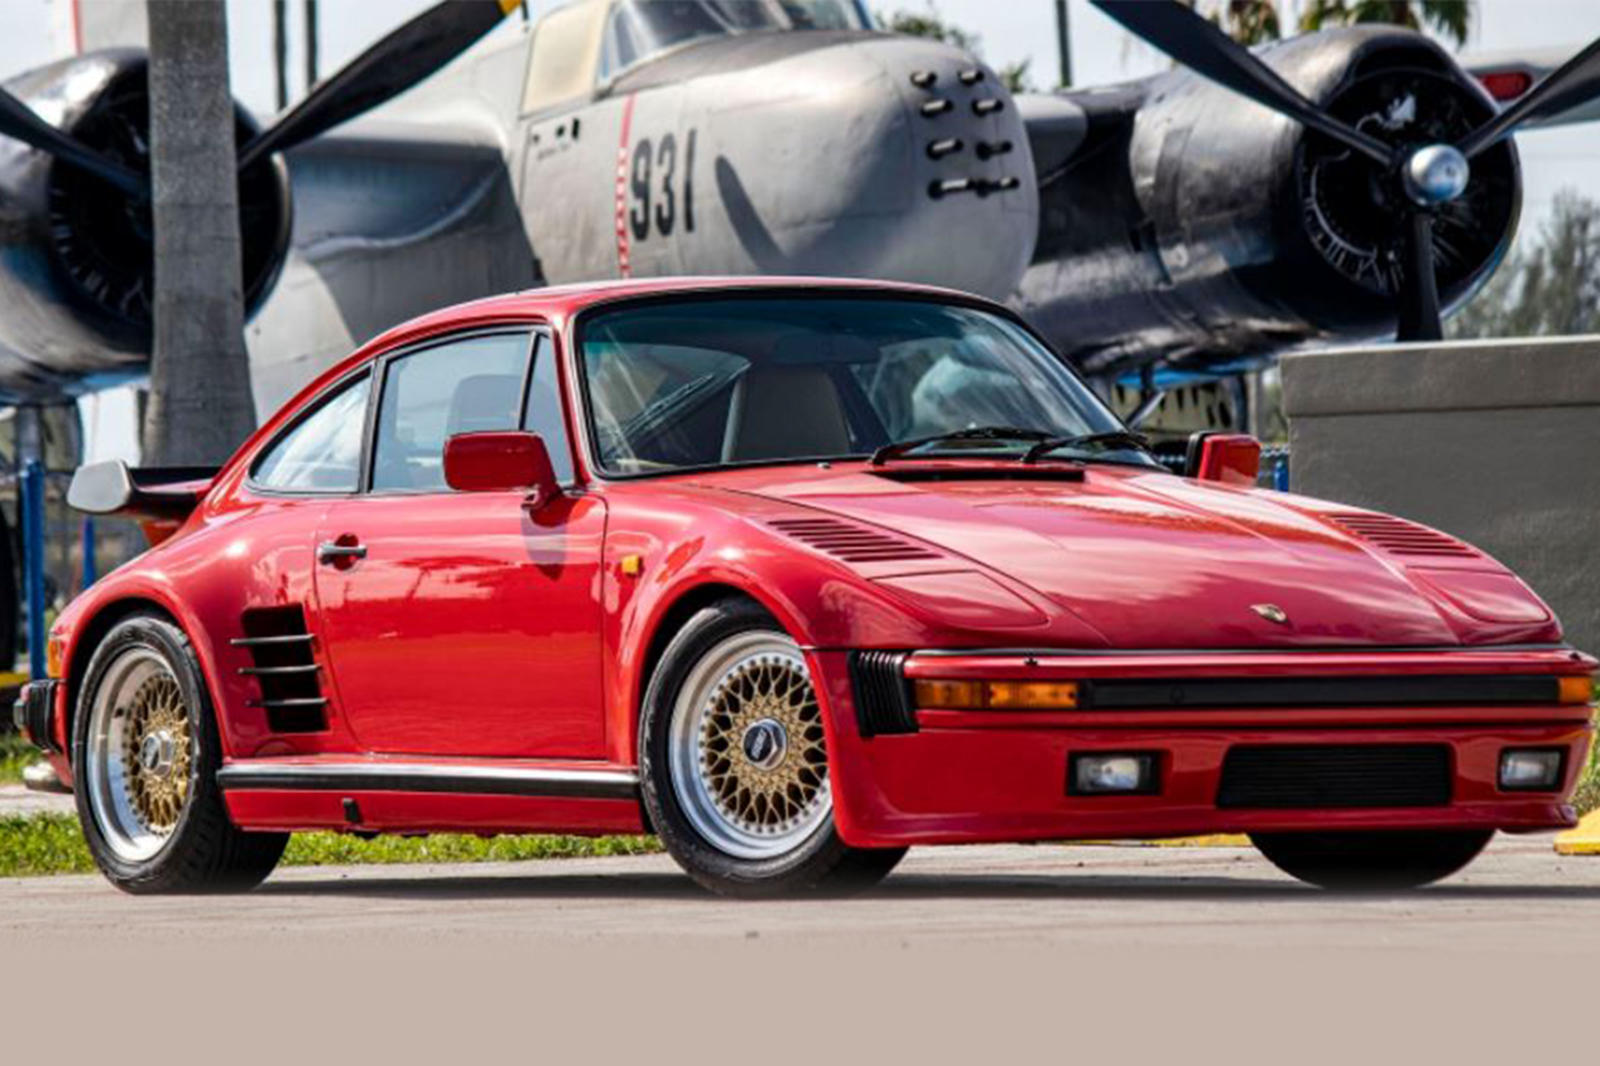 photo of This Porsche 930 Turbo Slantnose Is Like No Other 911 image